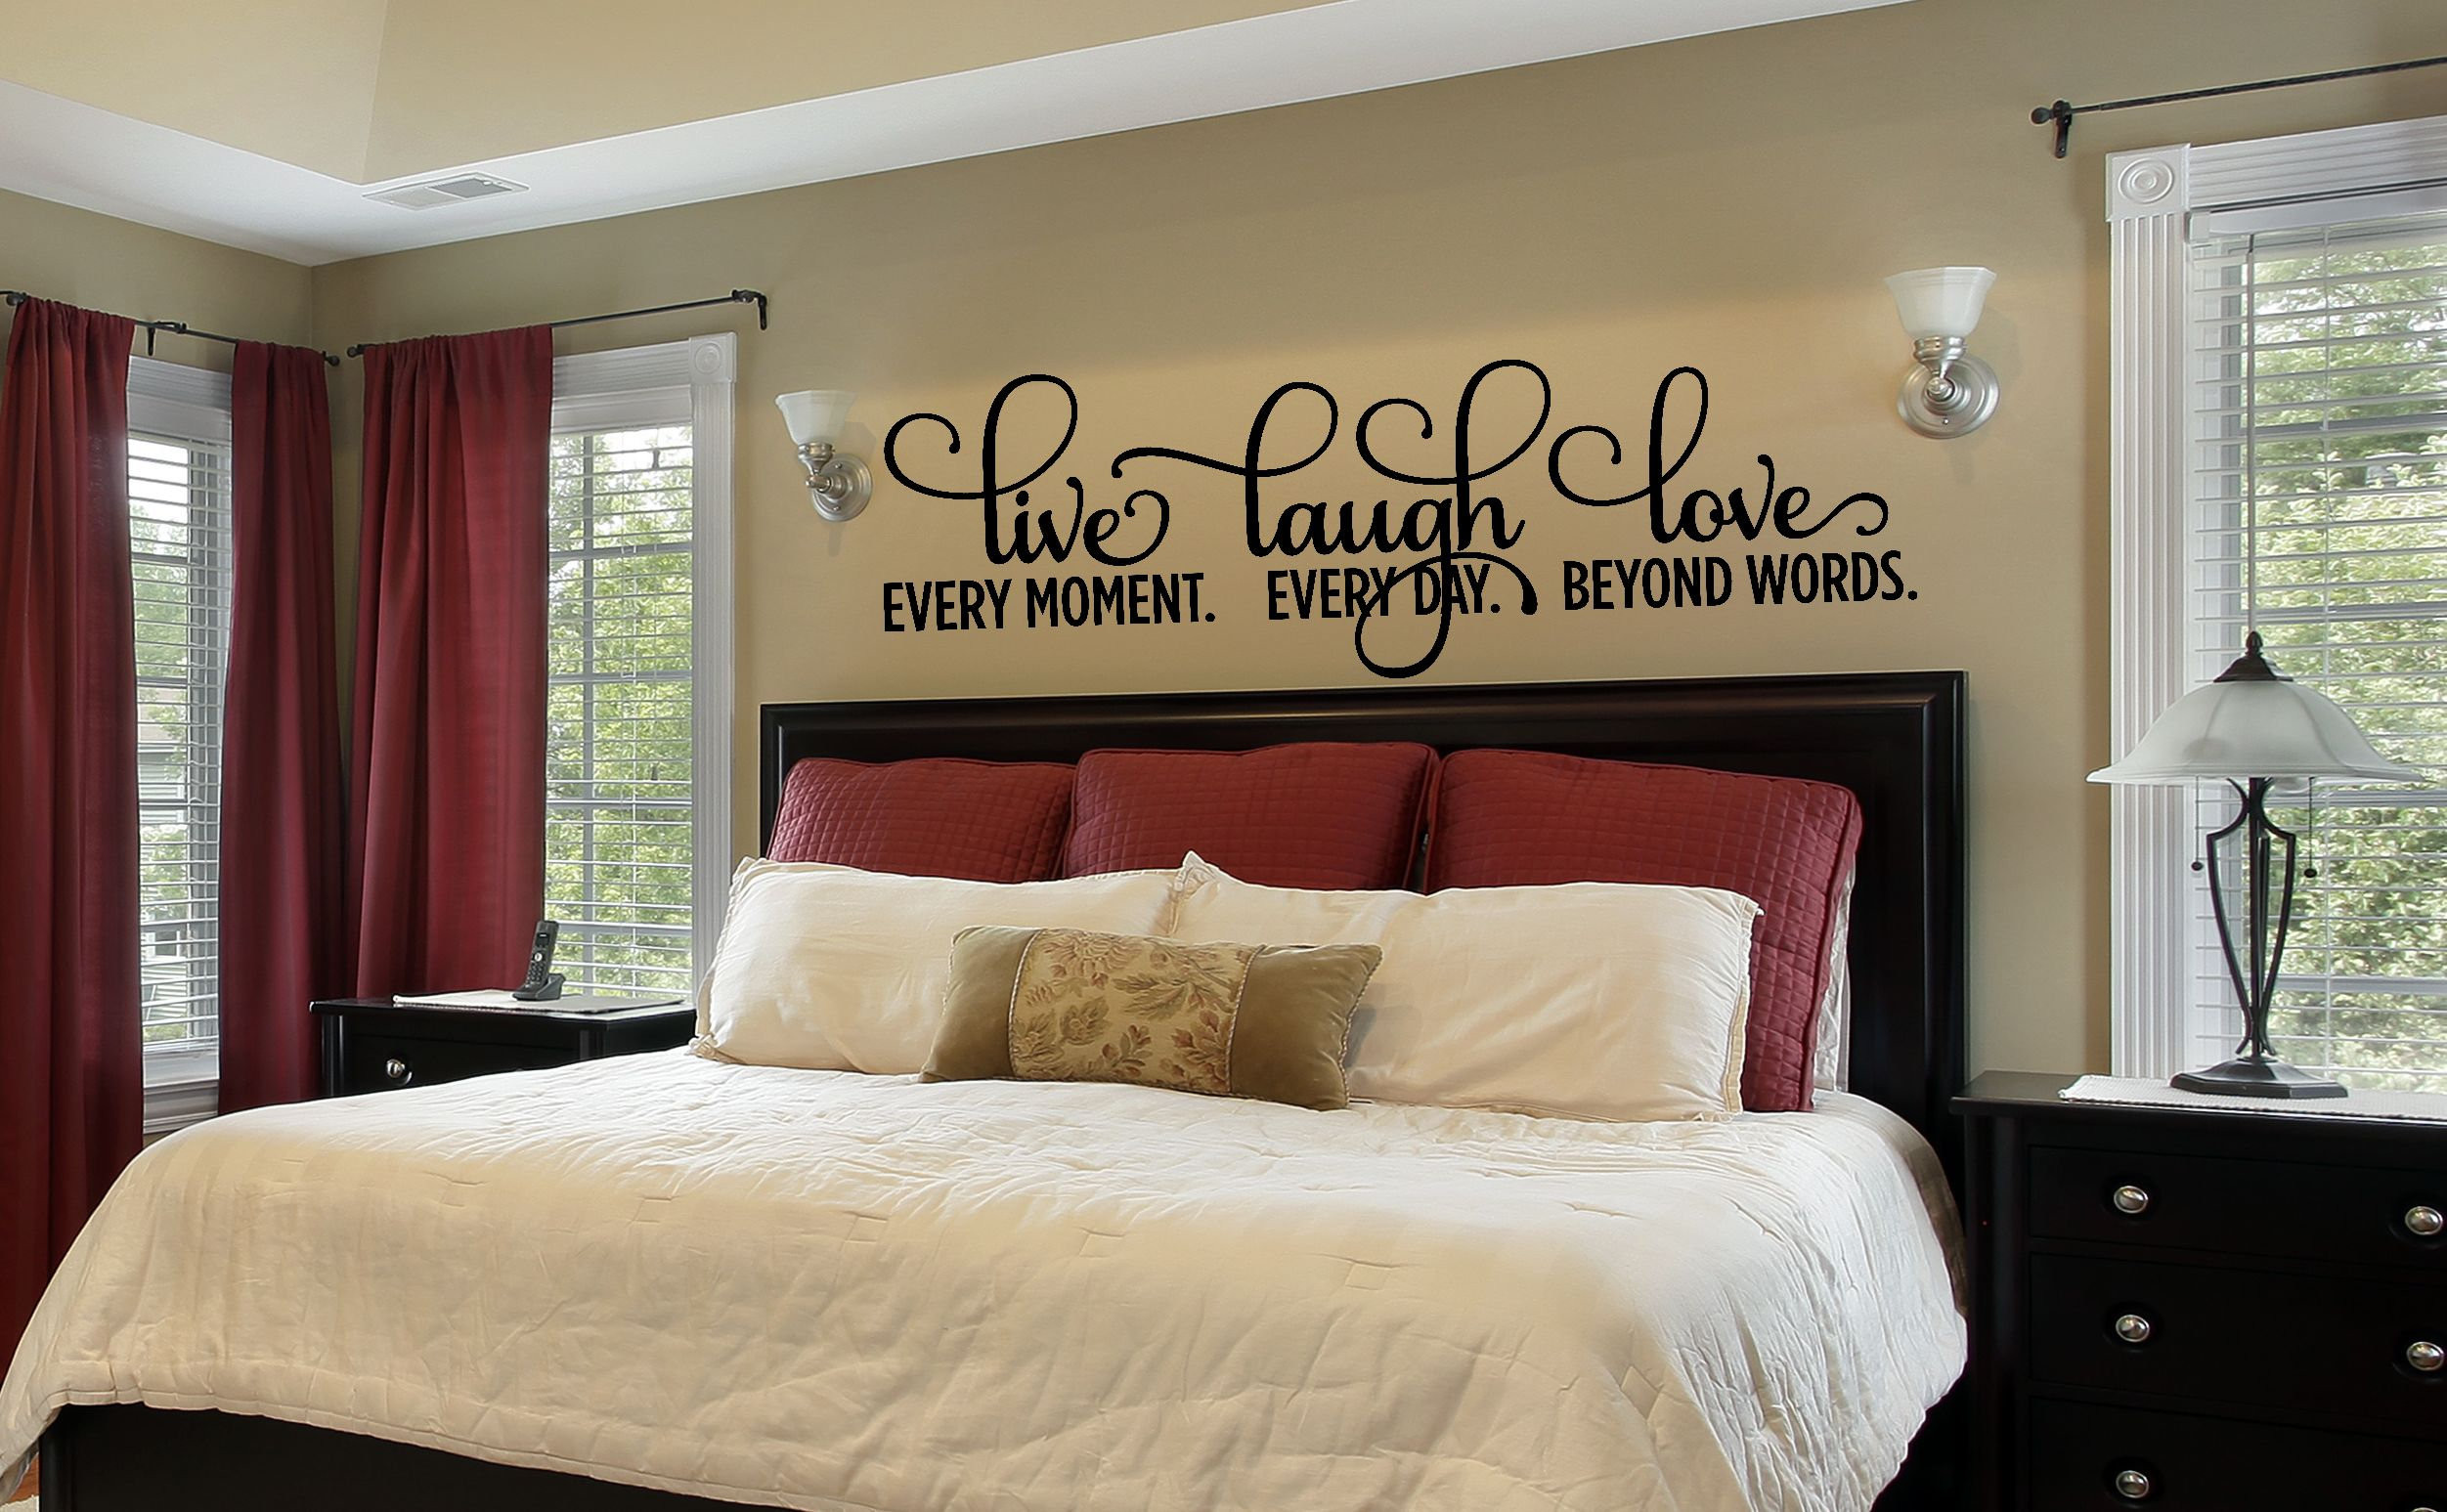 Wall Stickers For Bedroom
 Bedroom Decor Bedroom Wall Decal Master Bedroom Wall Decal